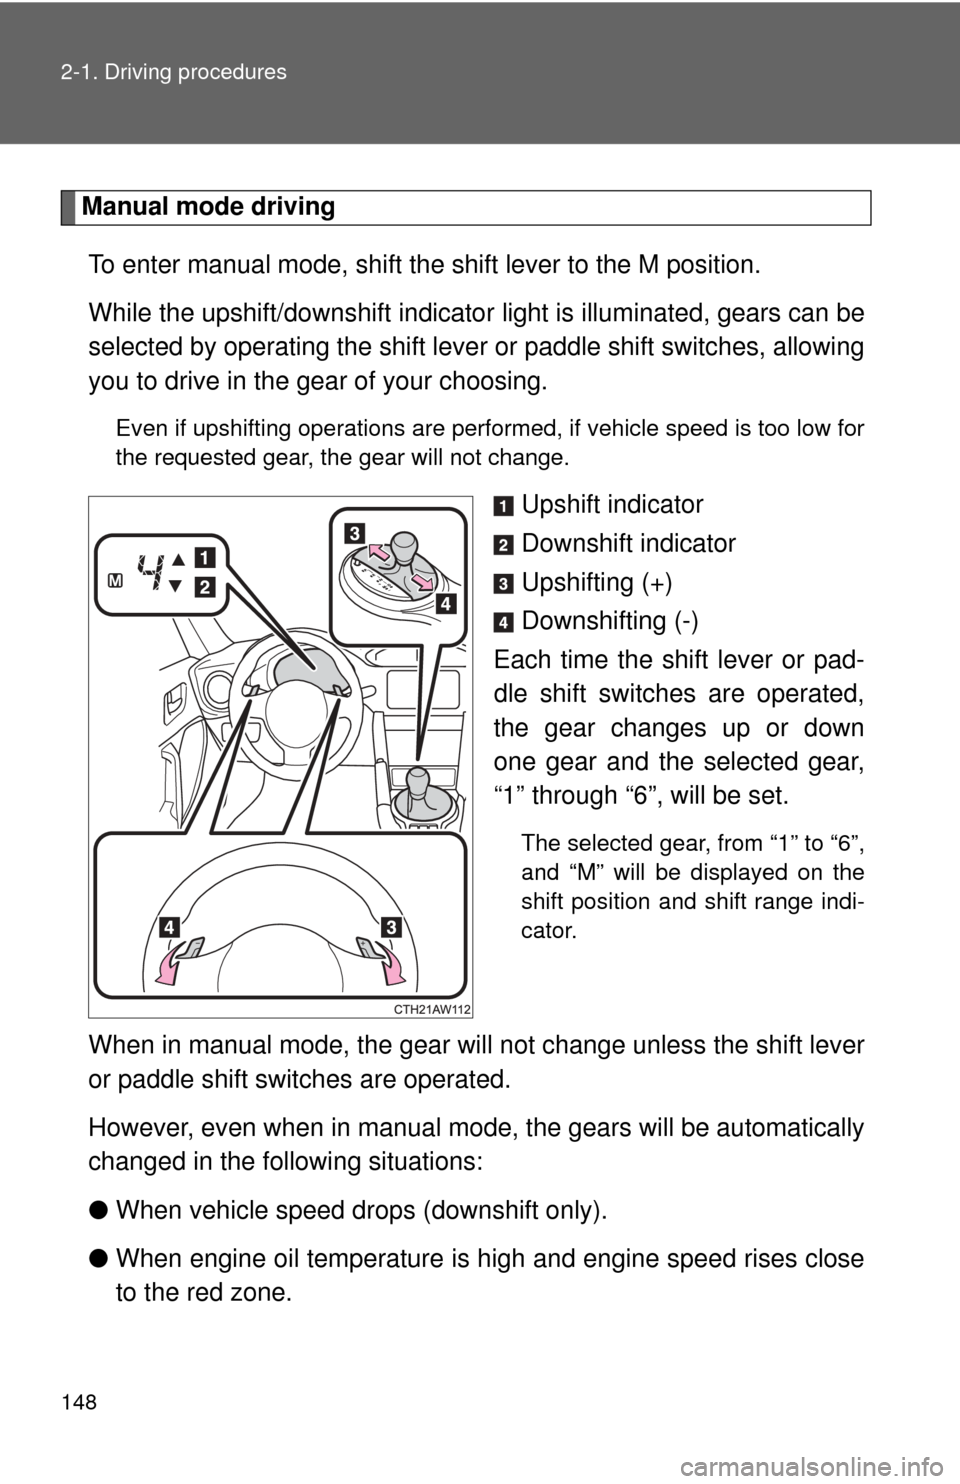 TOYOTA GT86 2017 1.G Owners Manual 148 2-1. Driving procedures
Manual mode drivingTo enter manual mode, shift the shift lever to the M position. 
While the upshift/downshift indicator  light is illuminated, gears can be
selected by ope